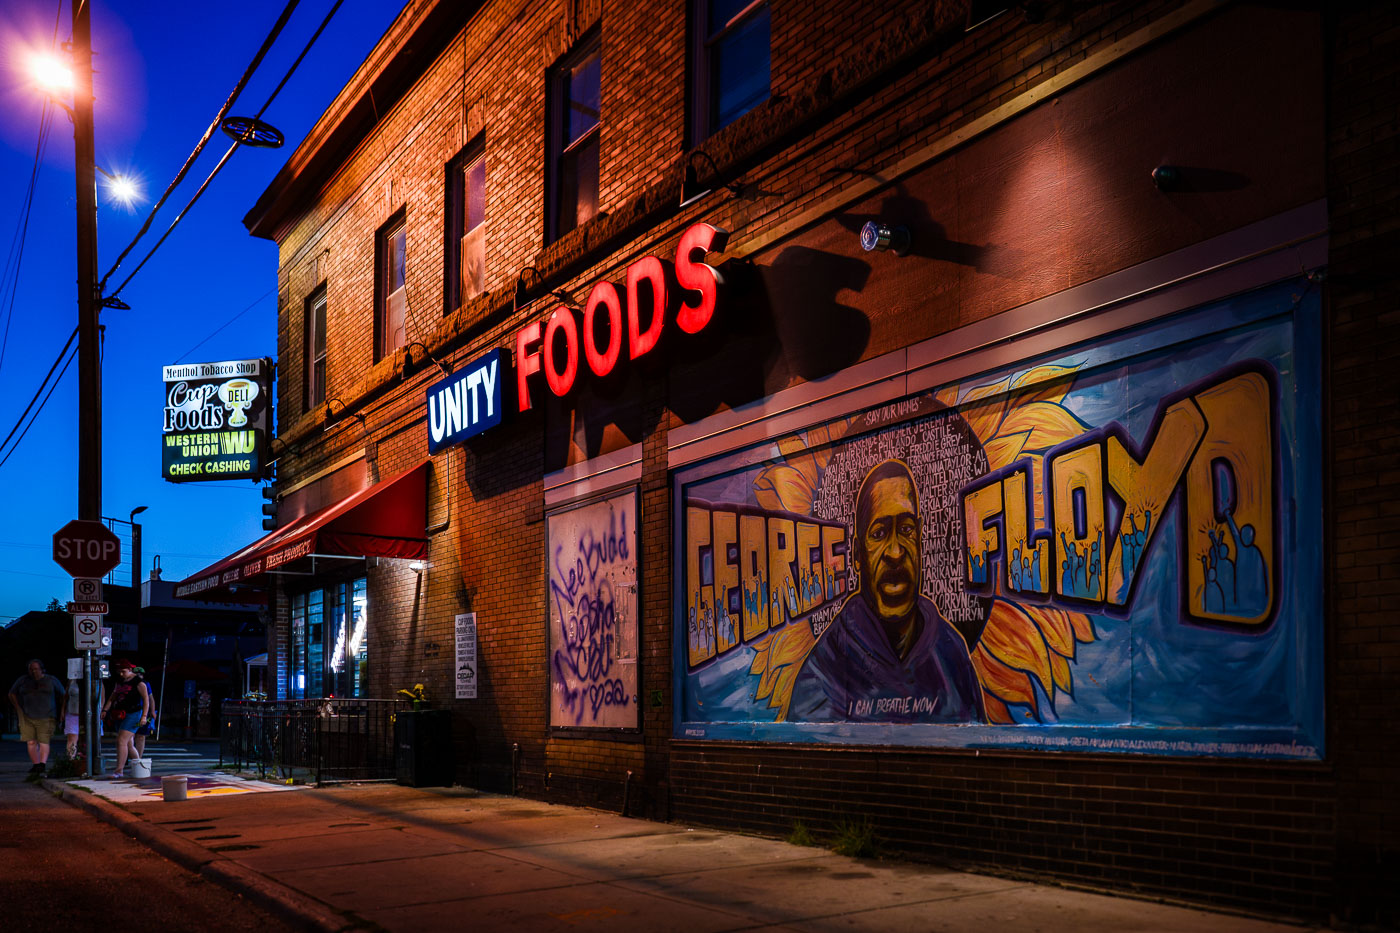 Unity Foods sign above George Floyd mural